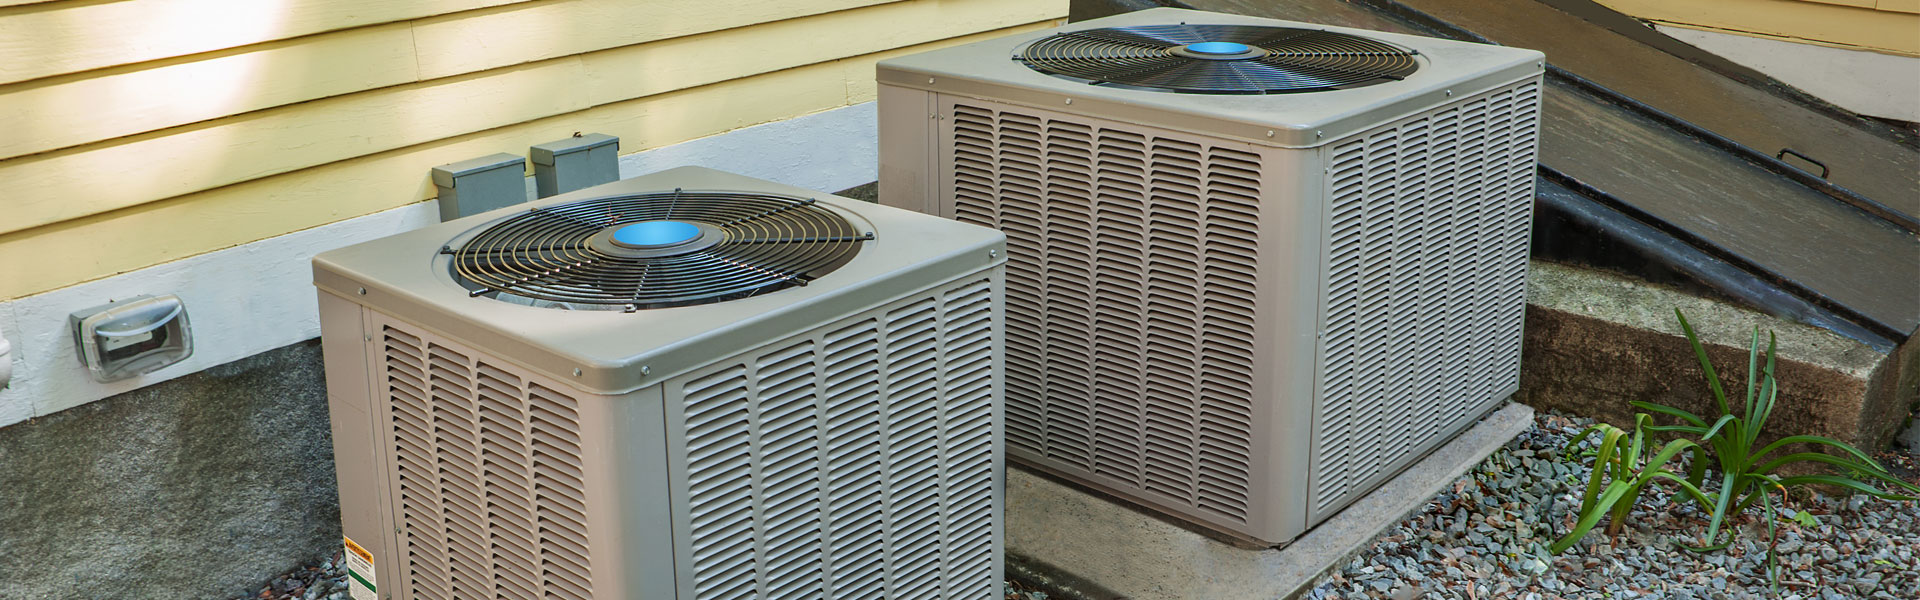 Heating And Air Conditioning Units